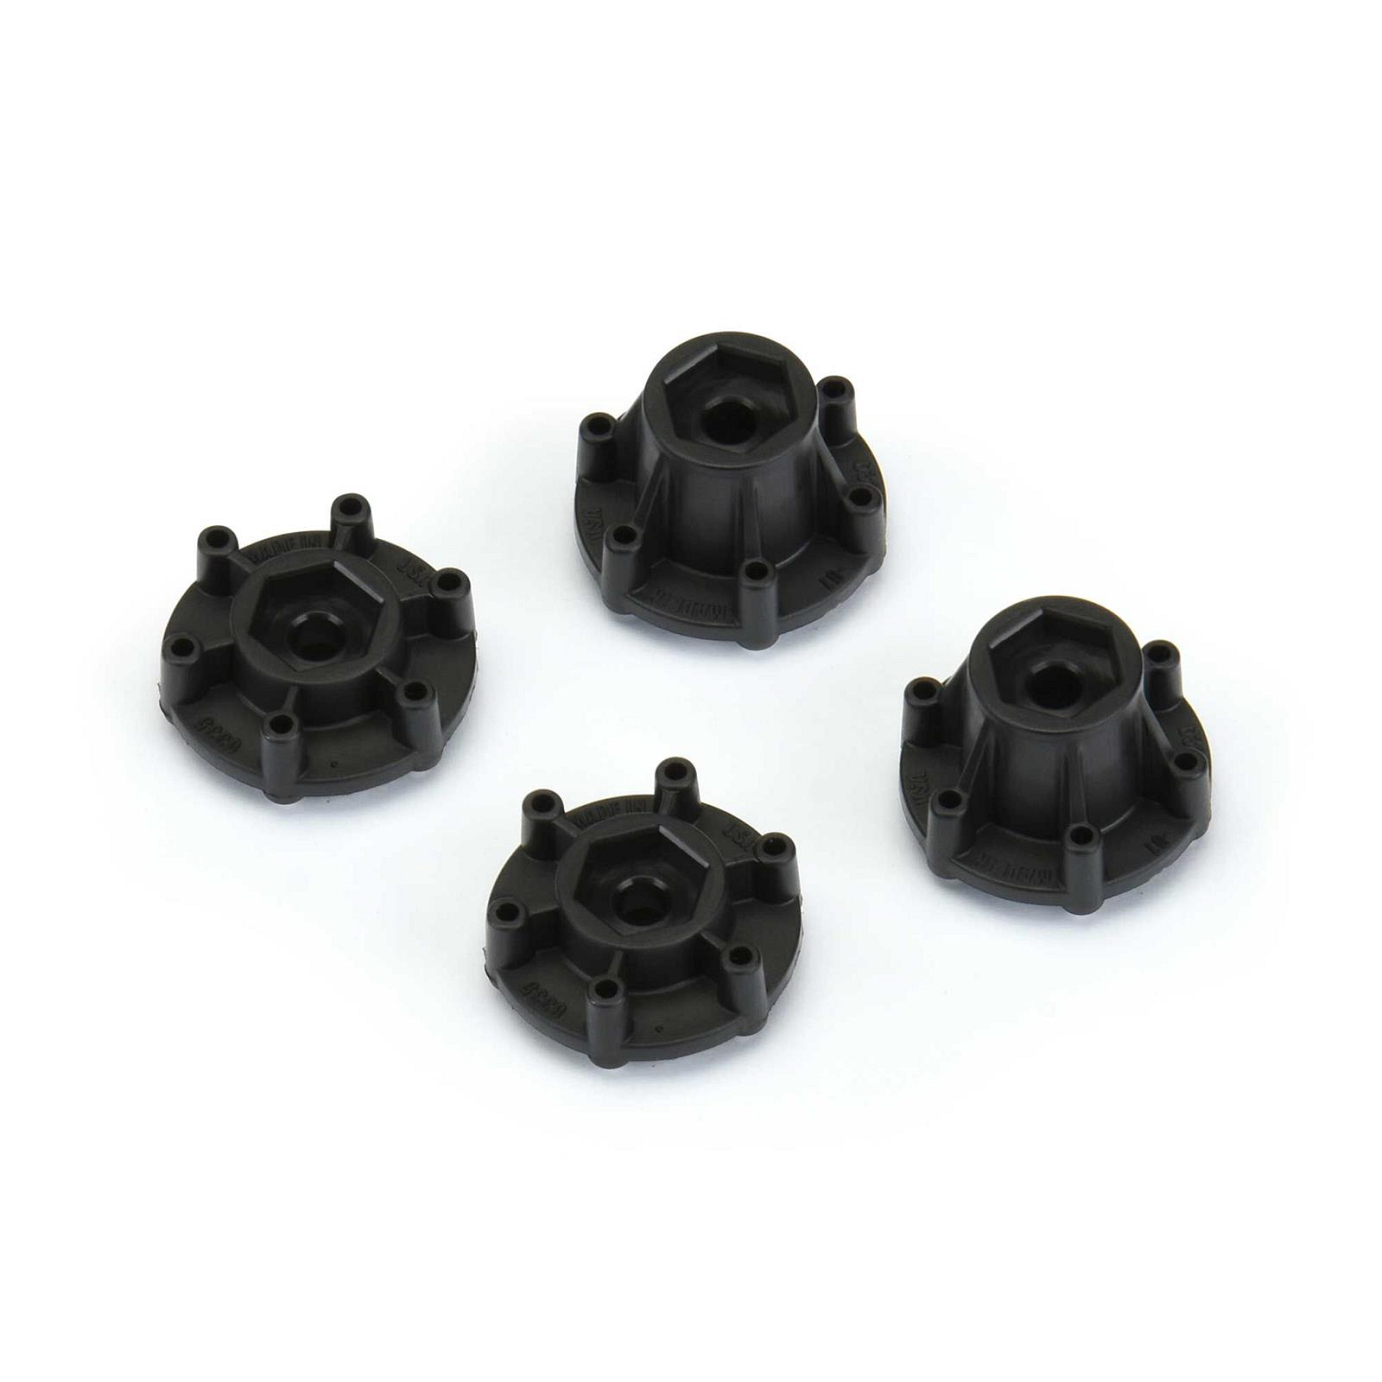 Proline 6x30 to 2mm Hex Adapters Narrow and Wide for 6x30 Wheels